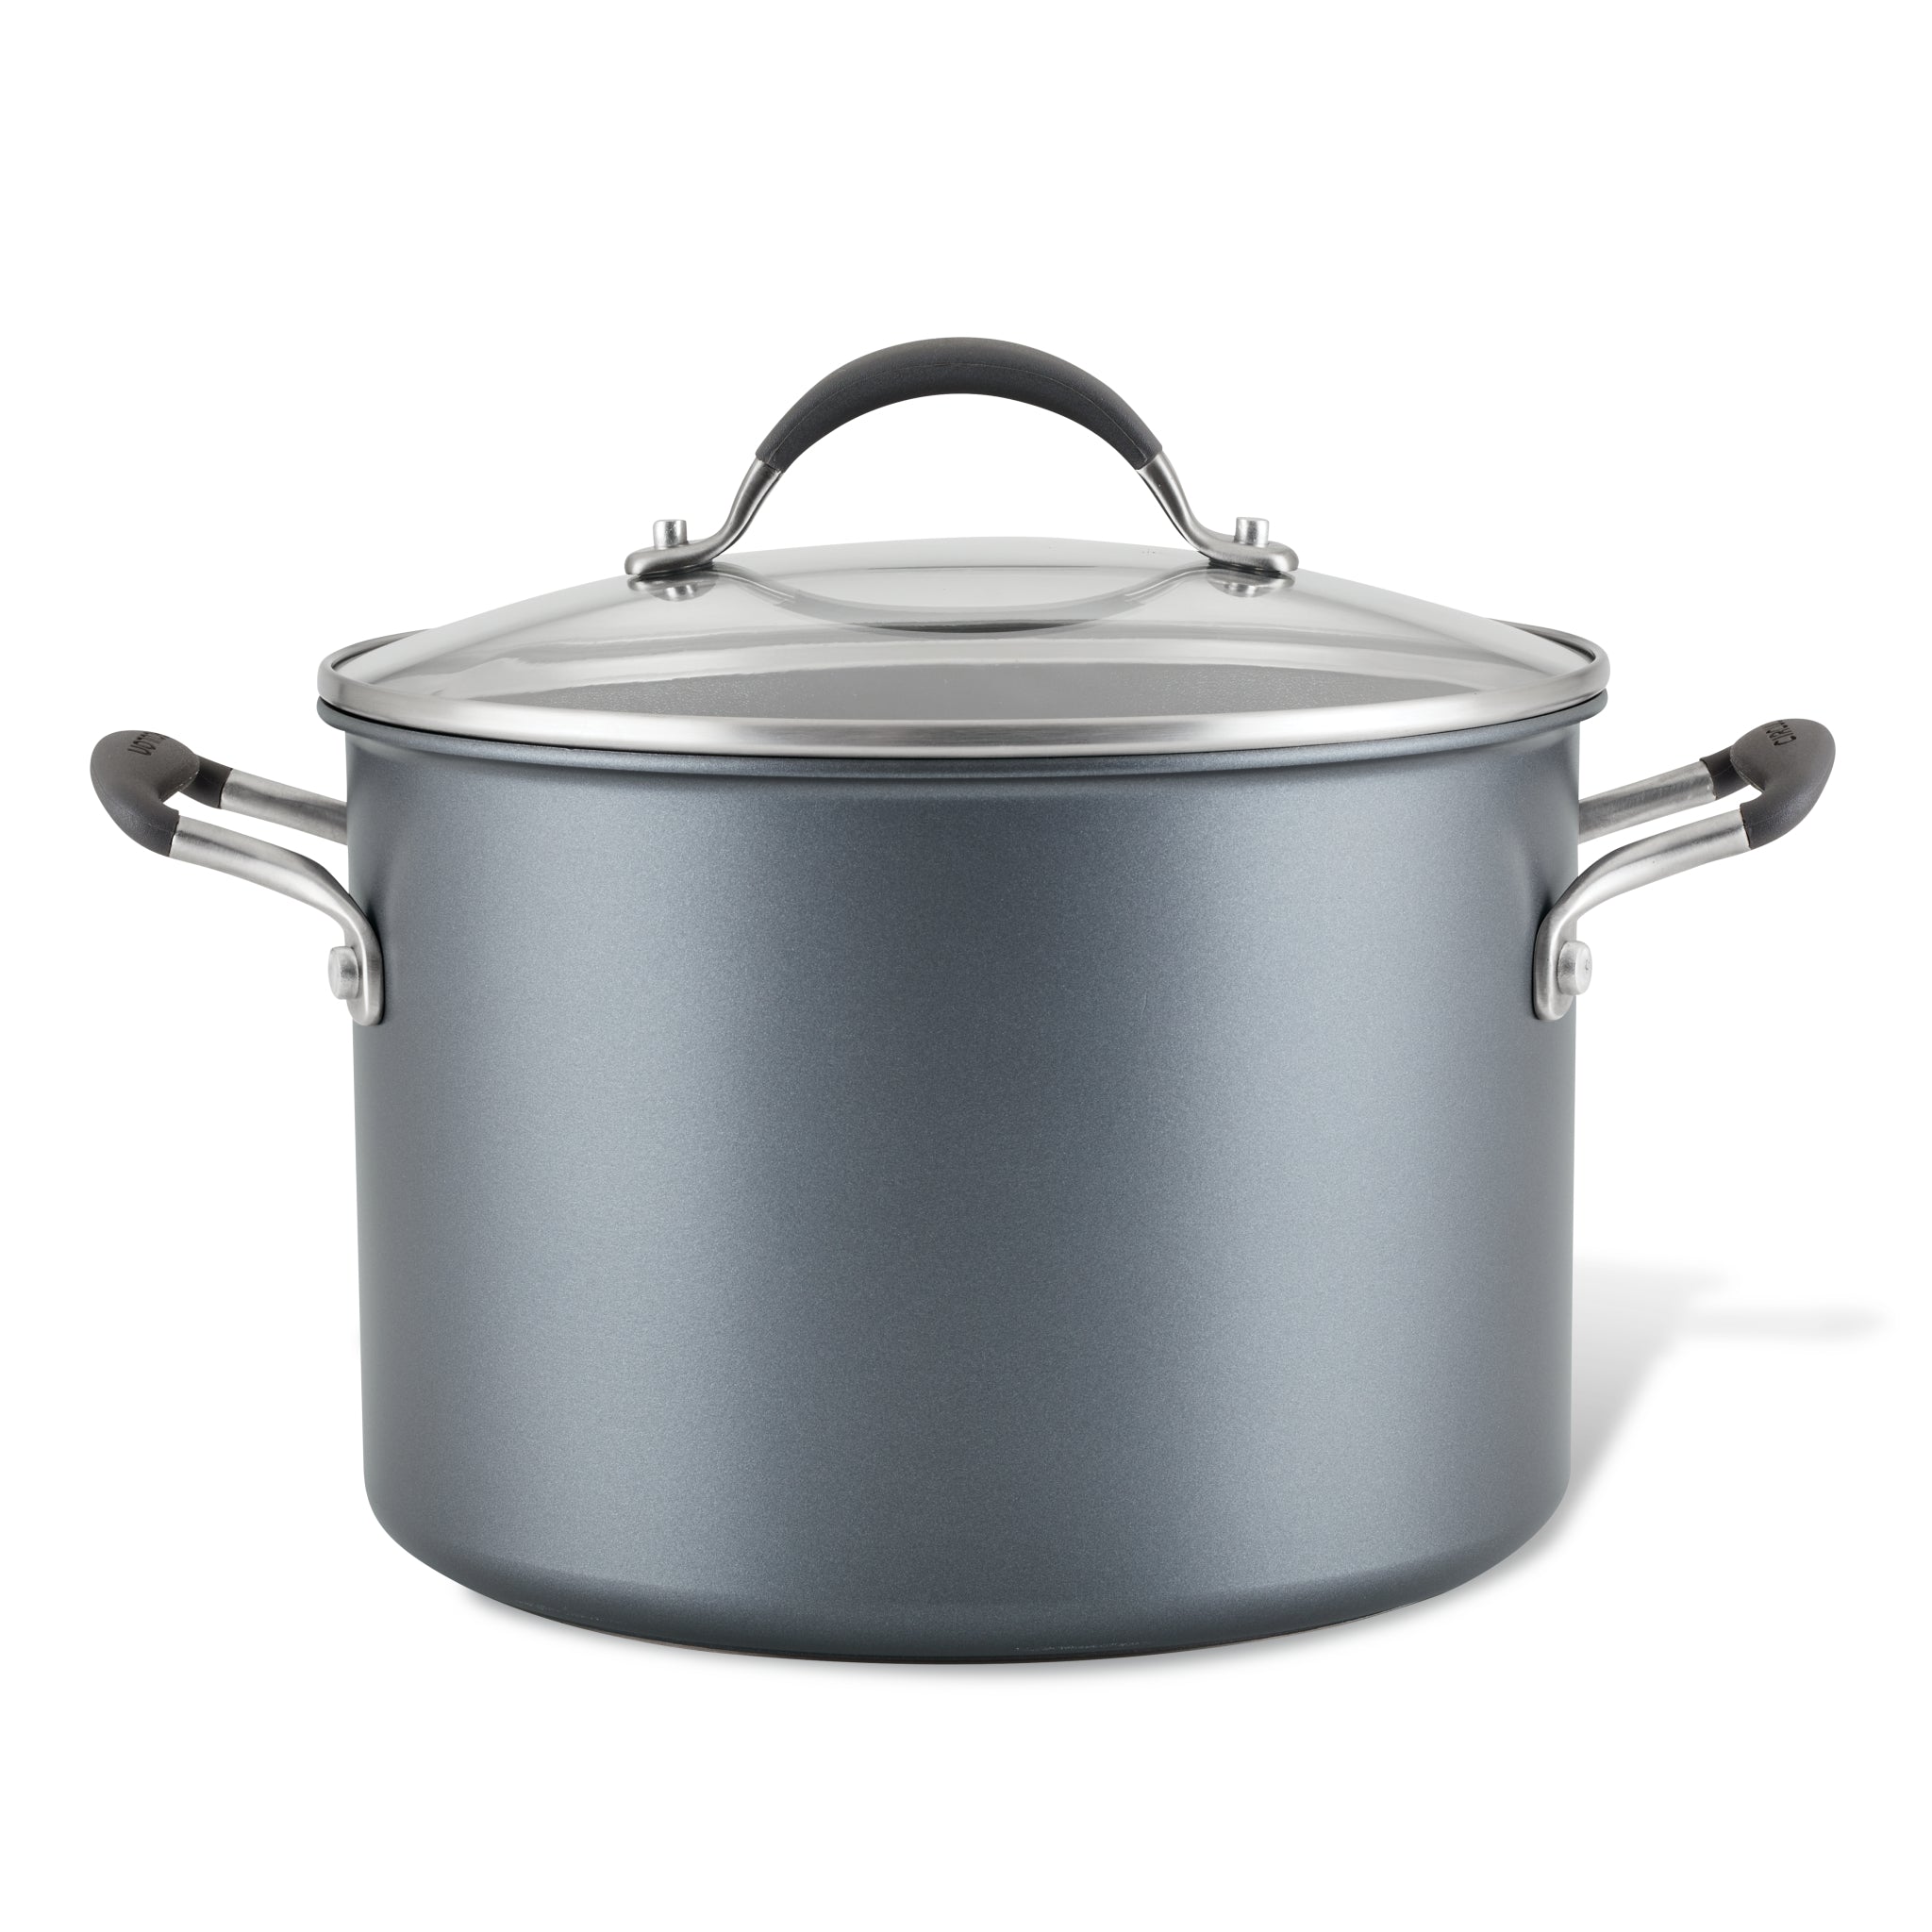 Quart ScratchDefense Nonstick Stockpot with Lid. There is one item shown.